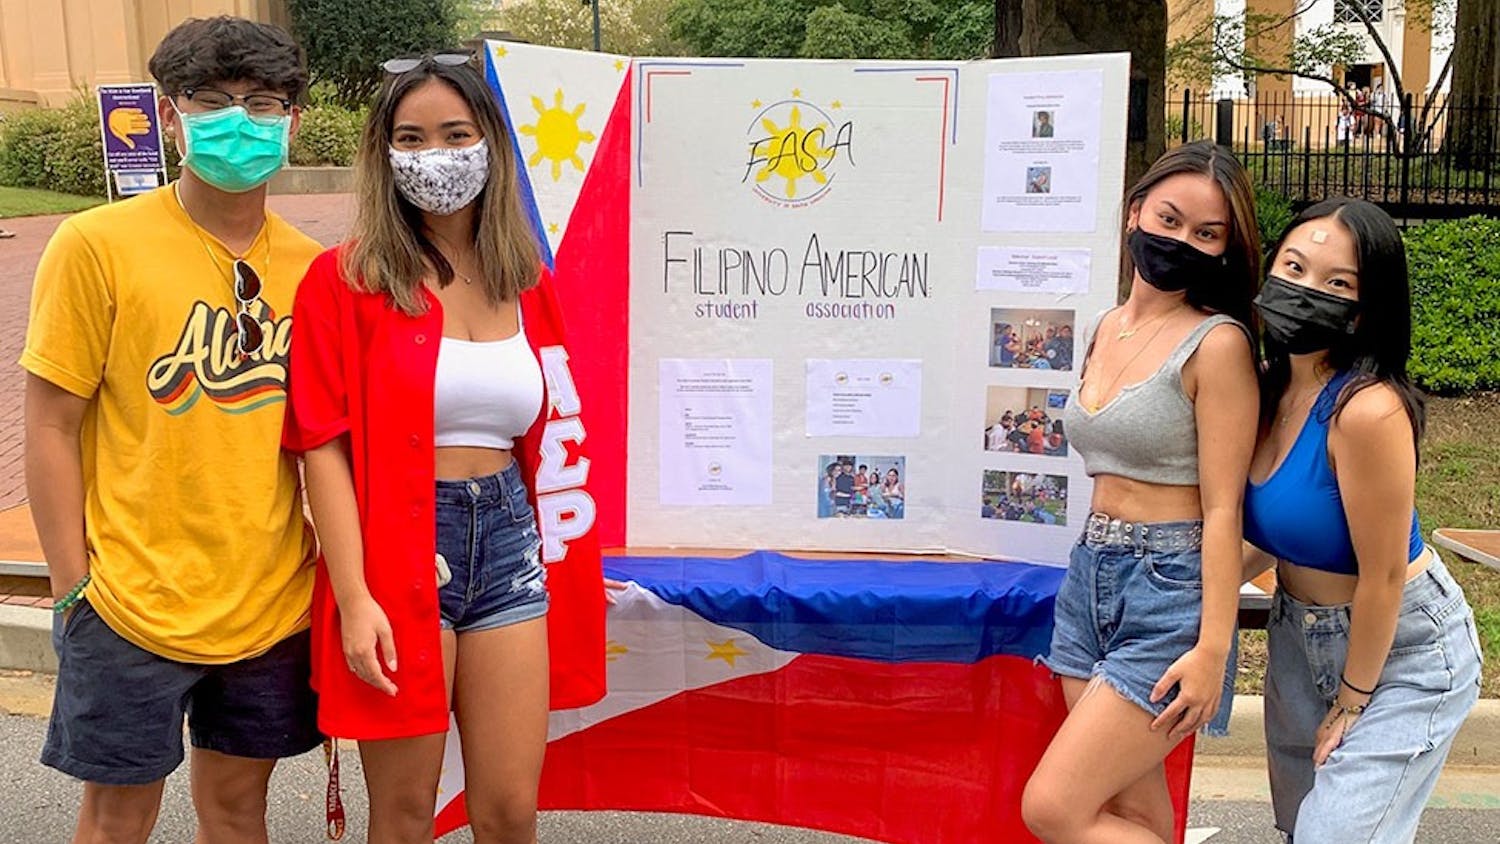 The Filipino American Student Association tabling on Green St. outside the Melton Observatory.